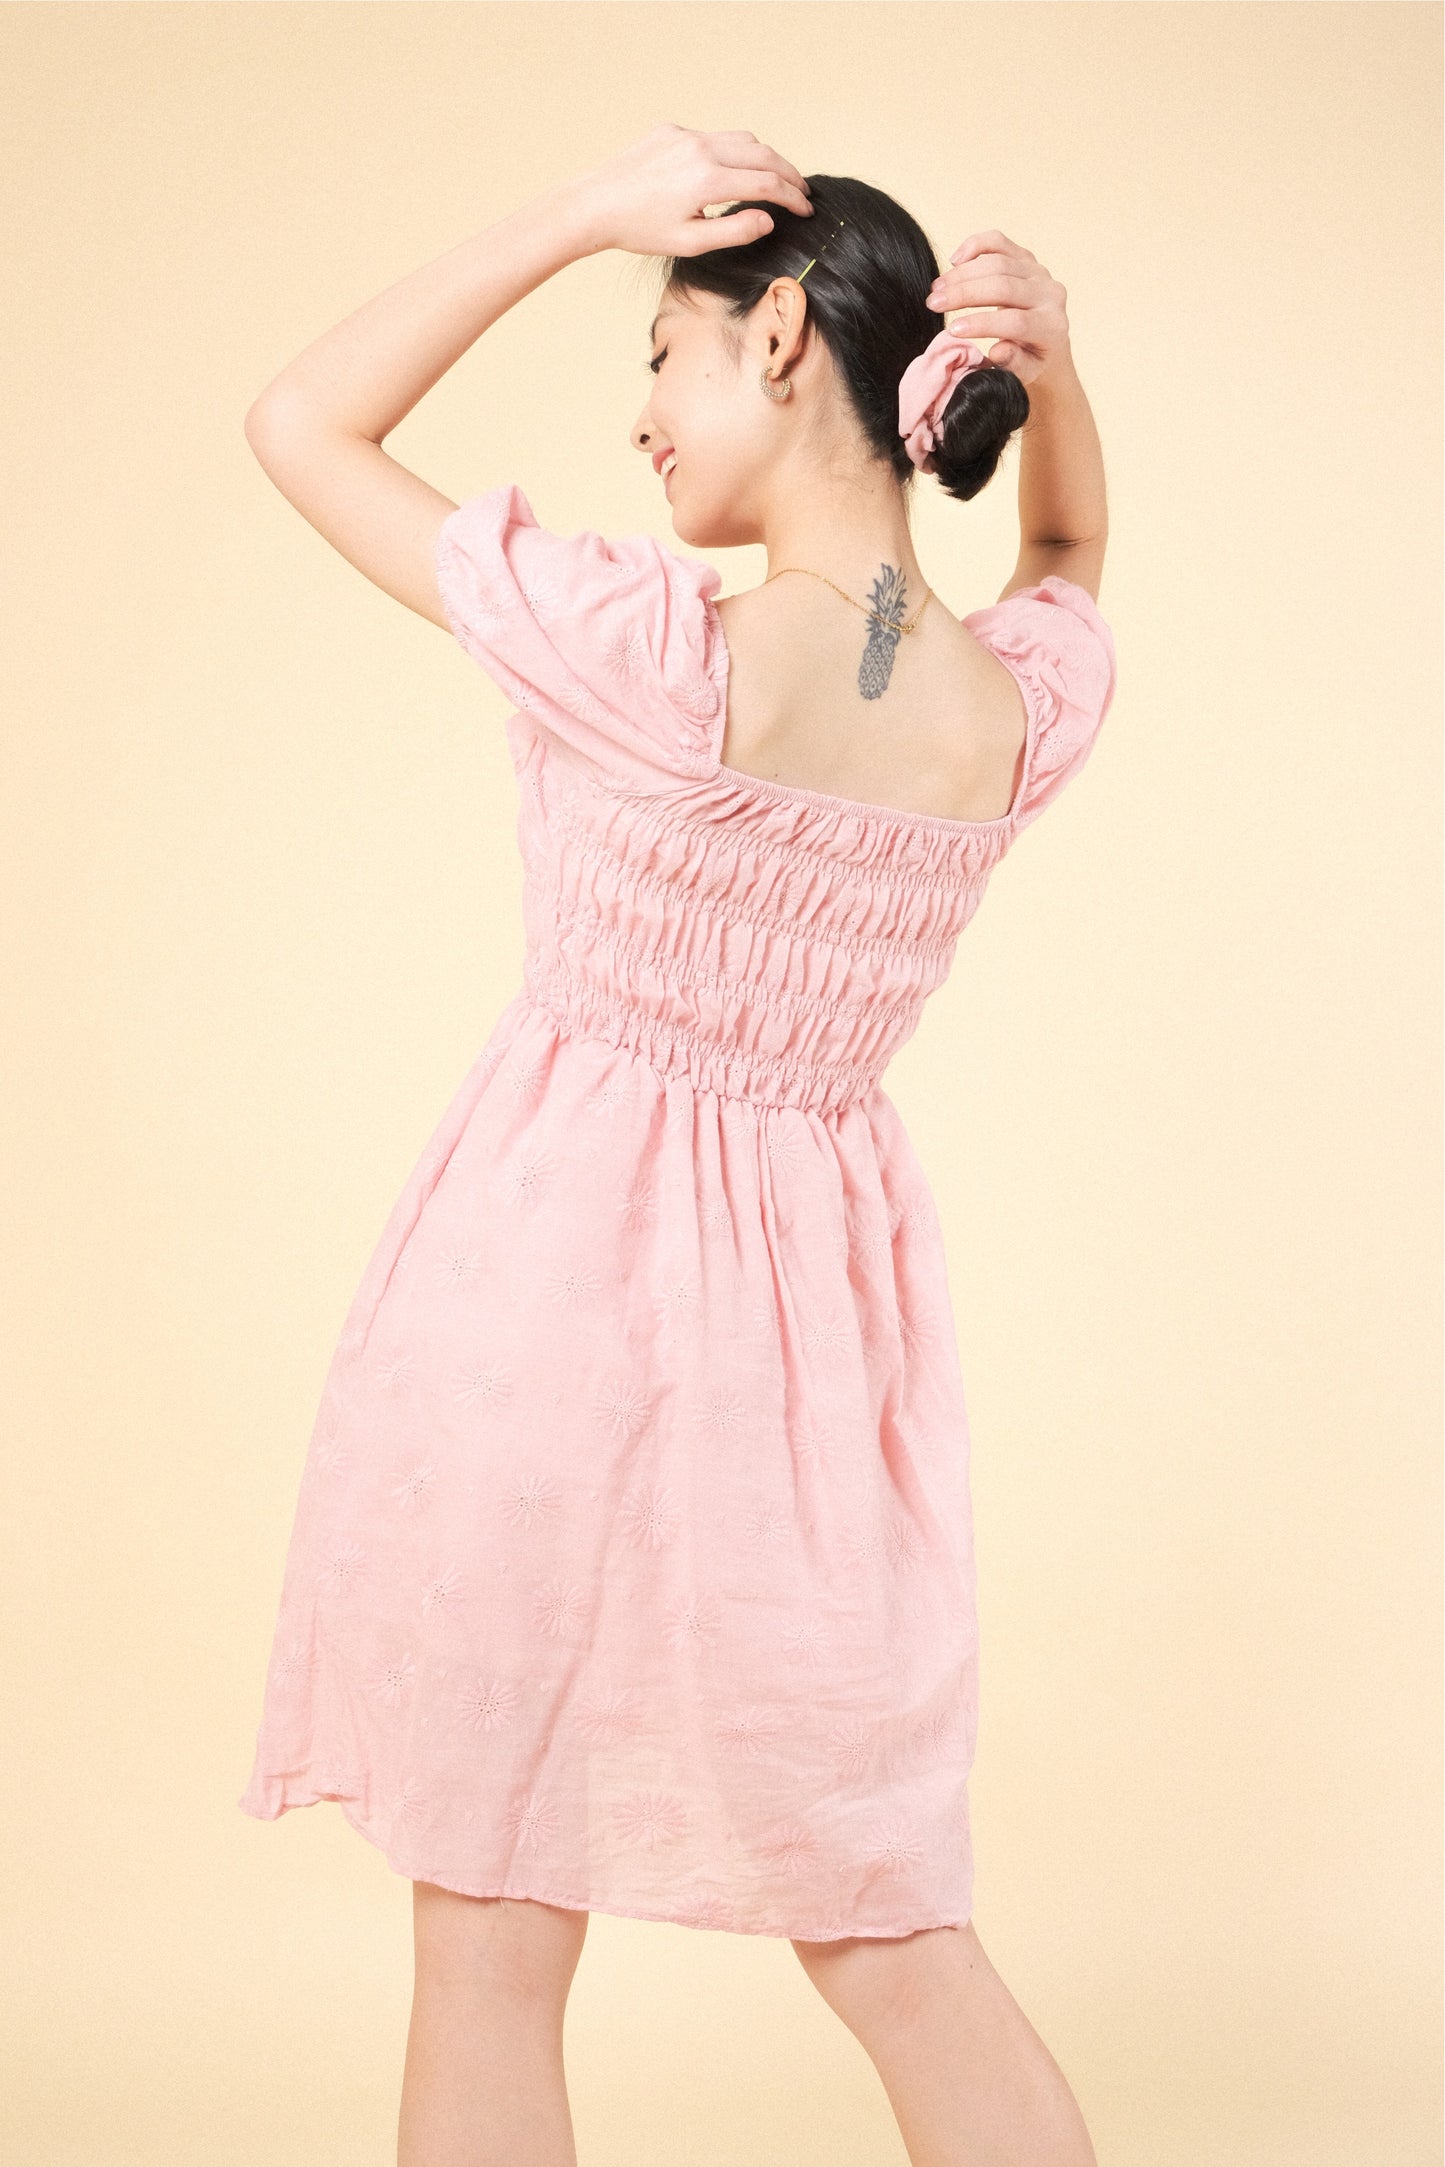 PAISLEY DRESS IN BABY PINK